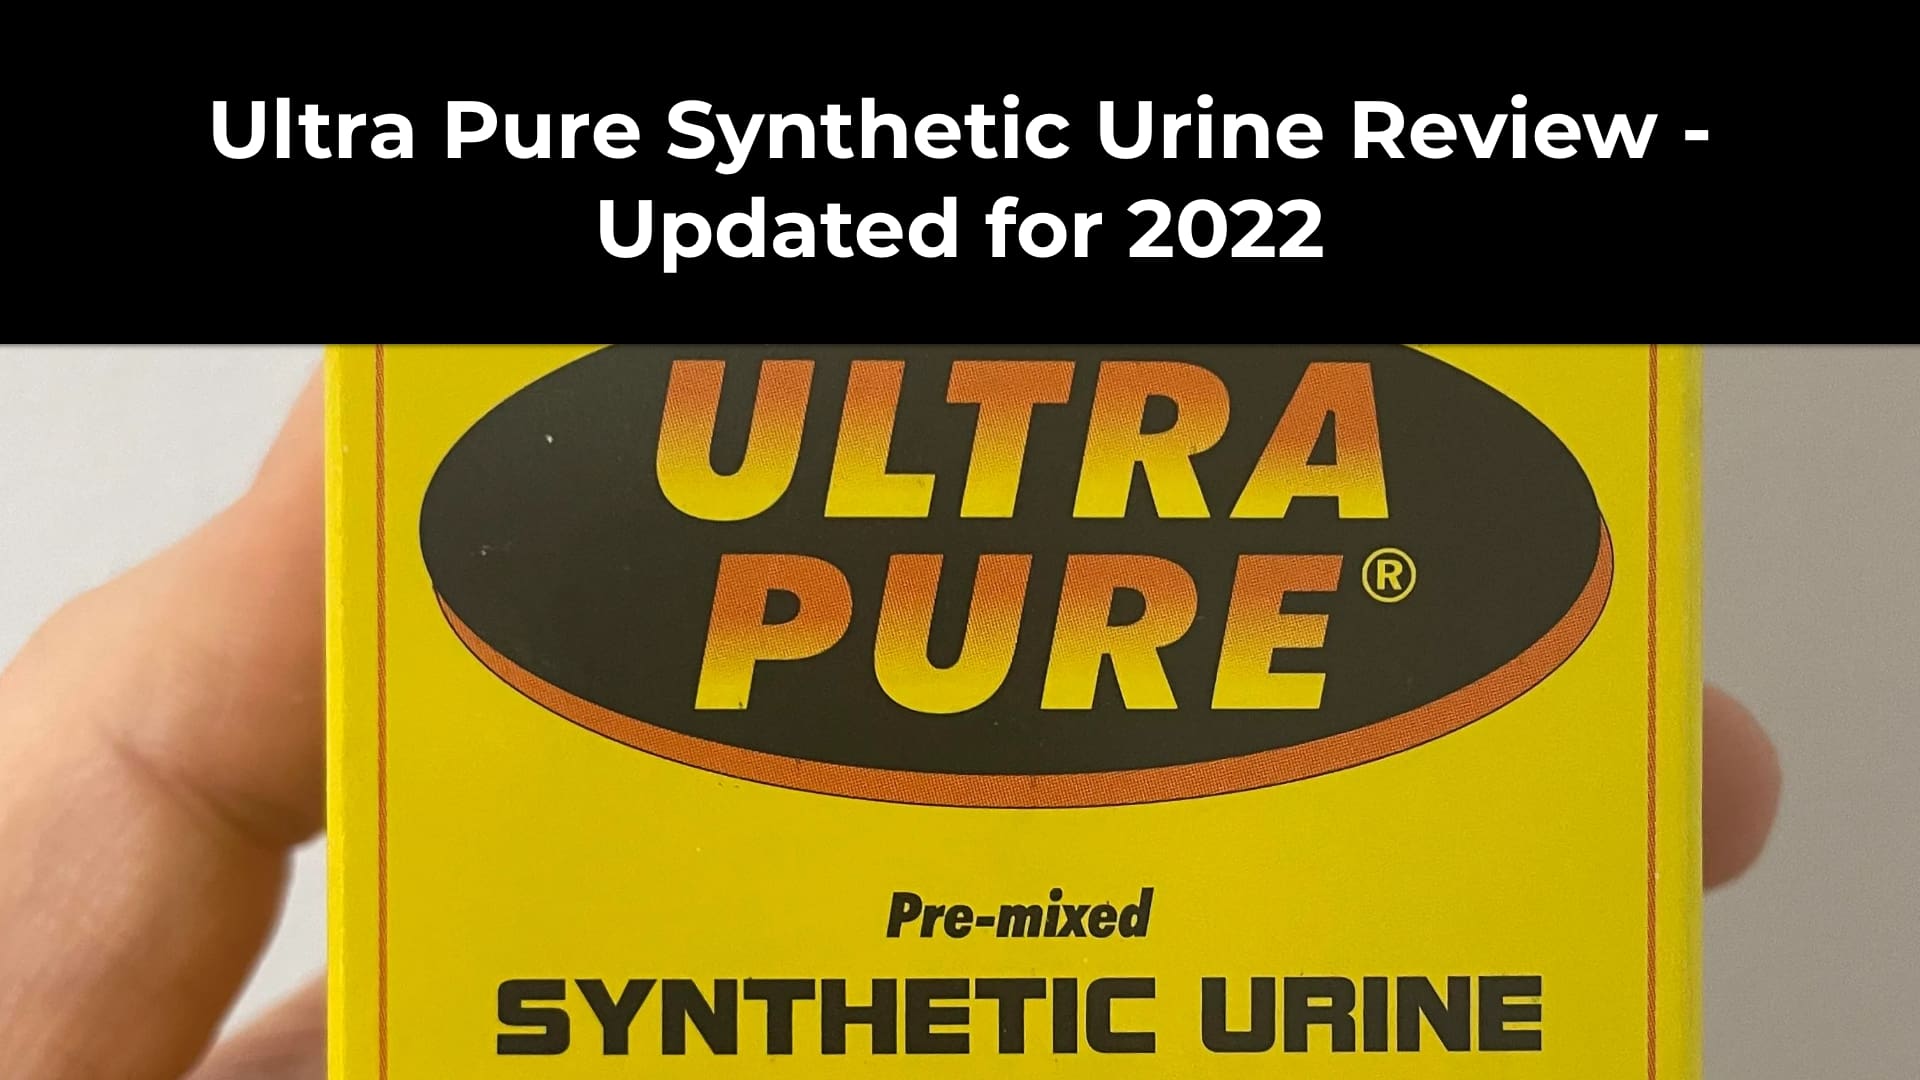 Ultra Pure Synthetic Urine Review - Updated for 2022